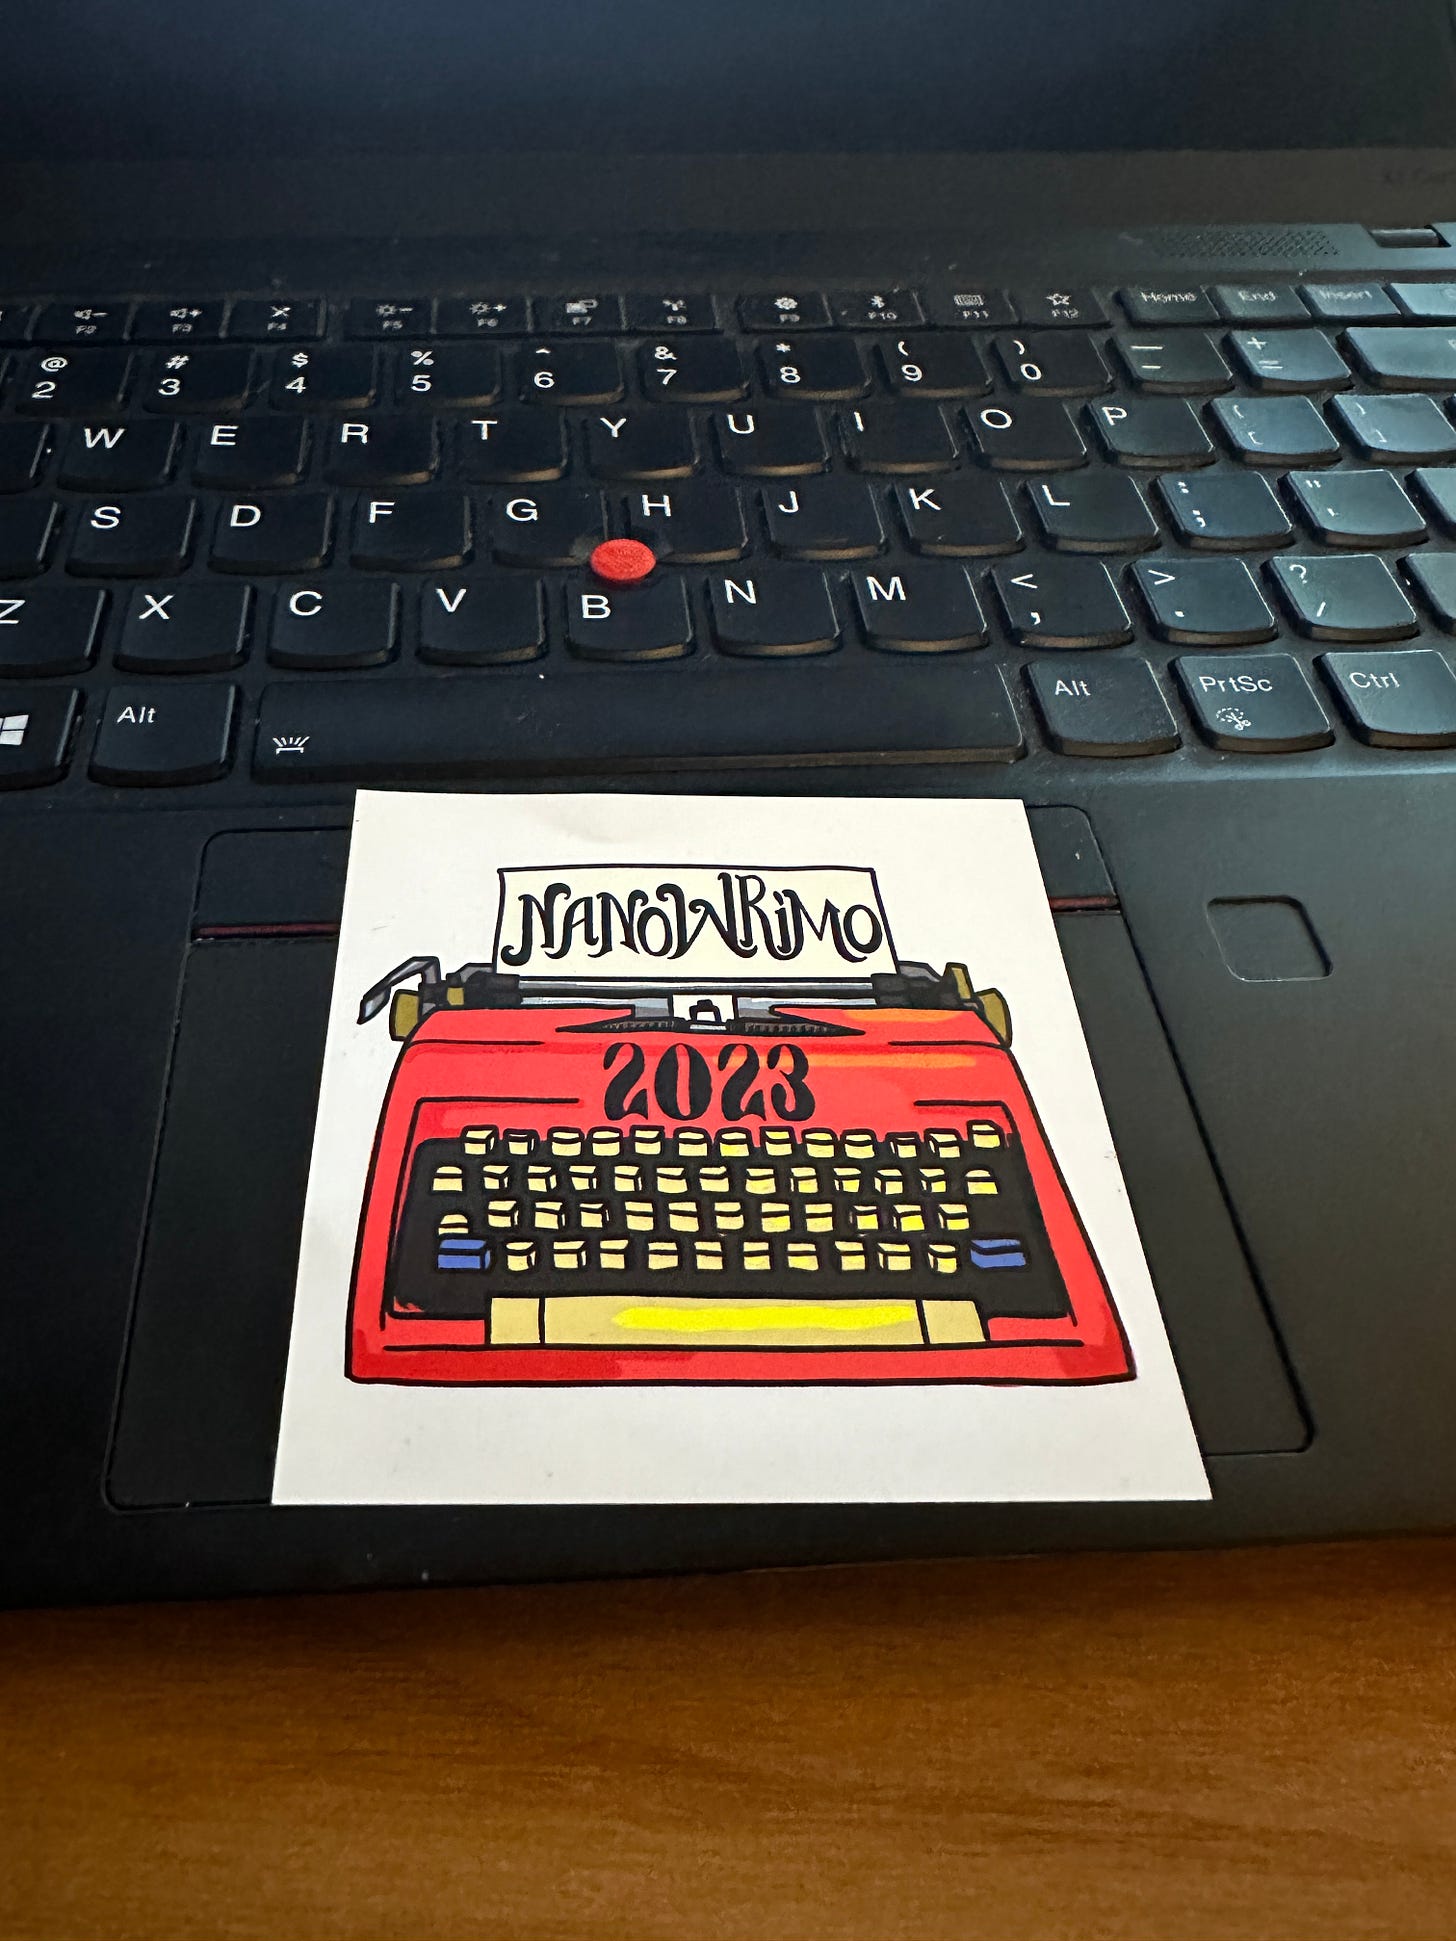 A Nanowrimo 2023 sticker showing a typewriter, resting on top of a laptop keyboard